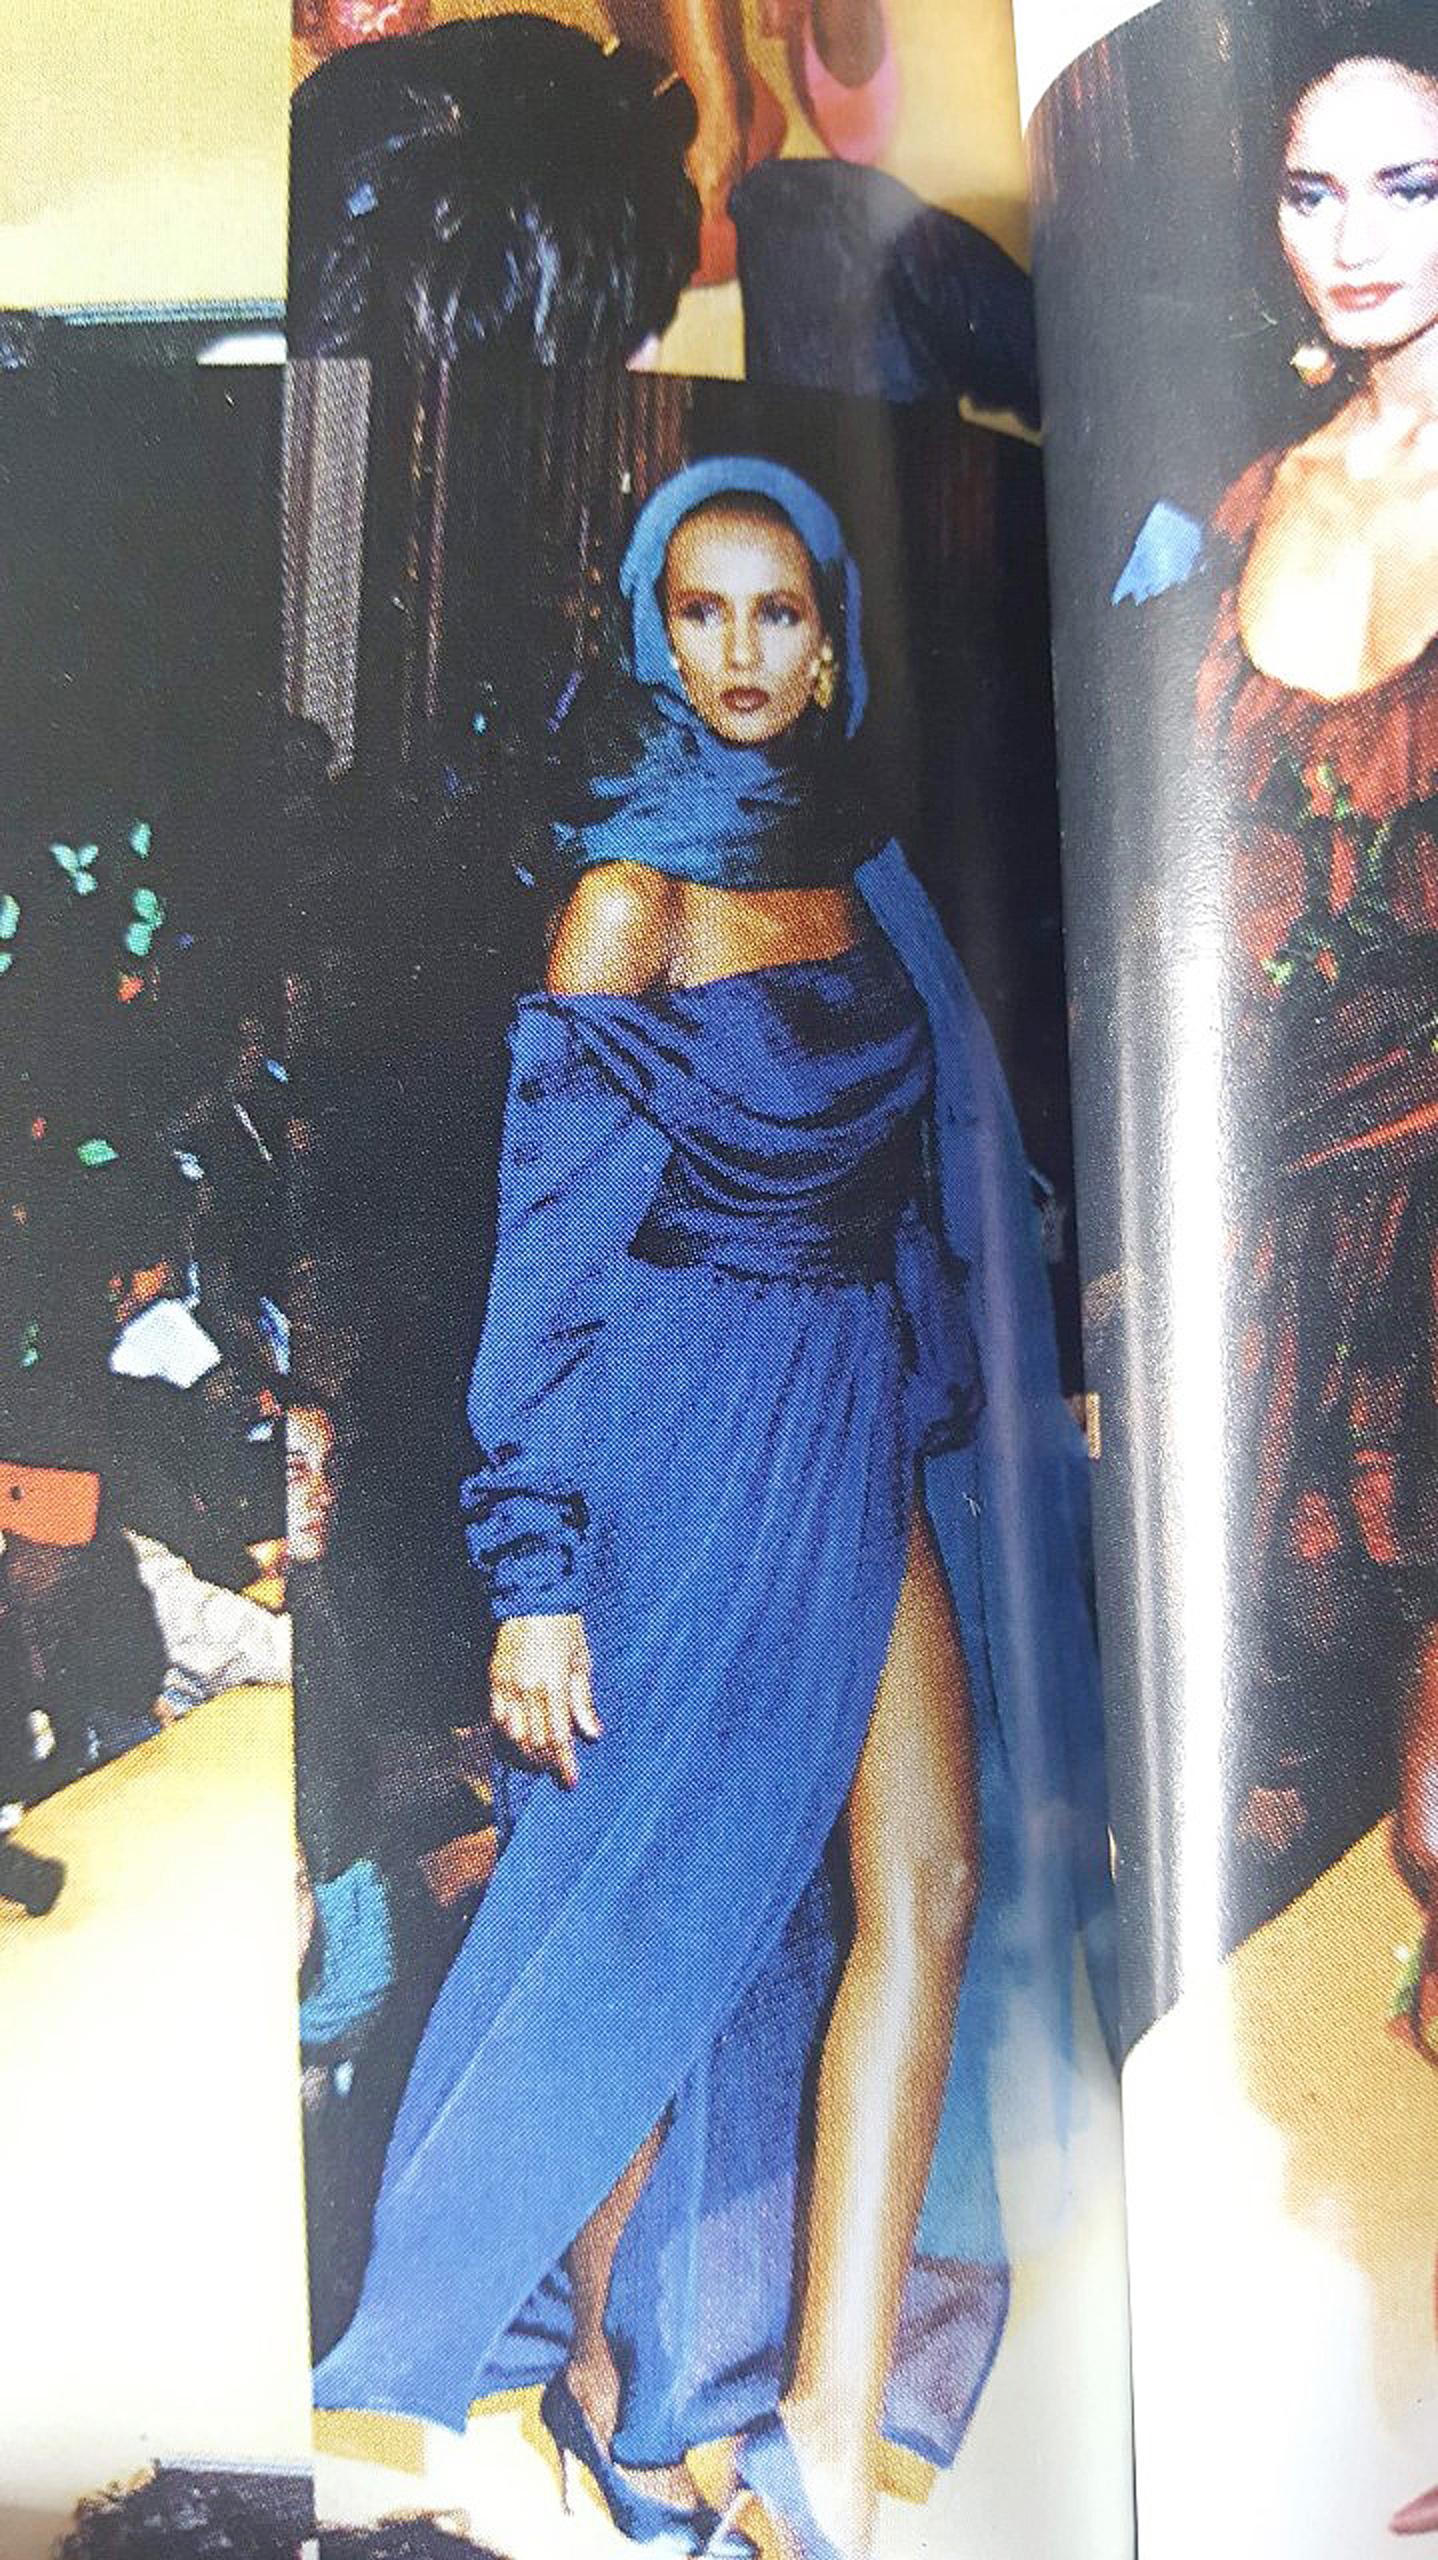 Breathtaking Yves Saint Laurent Haute-Couture gown from his iconic 1989 spring-summer documented collection. It is insanely chic with its fluid grecian goddess construction. The fabric is a luxurious cobalt-blue sheer sheer silk crepe complete with